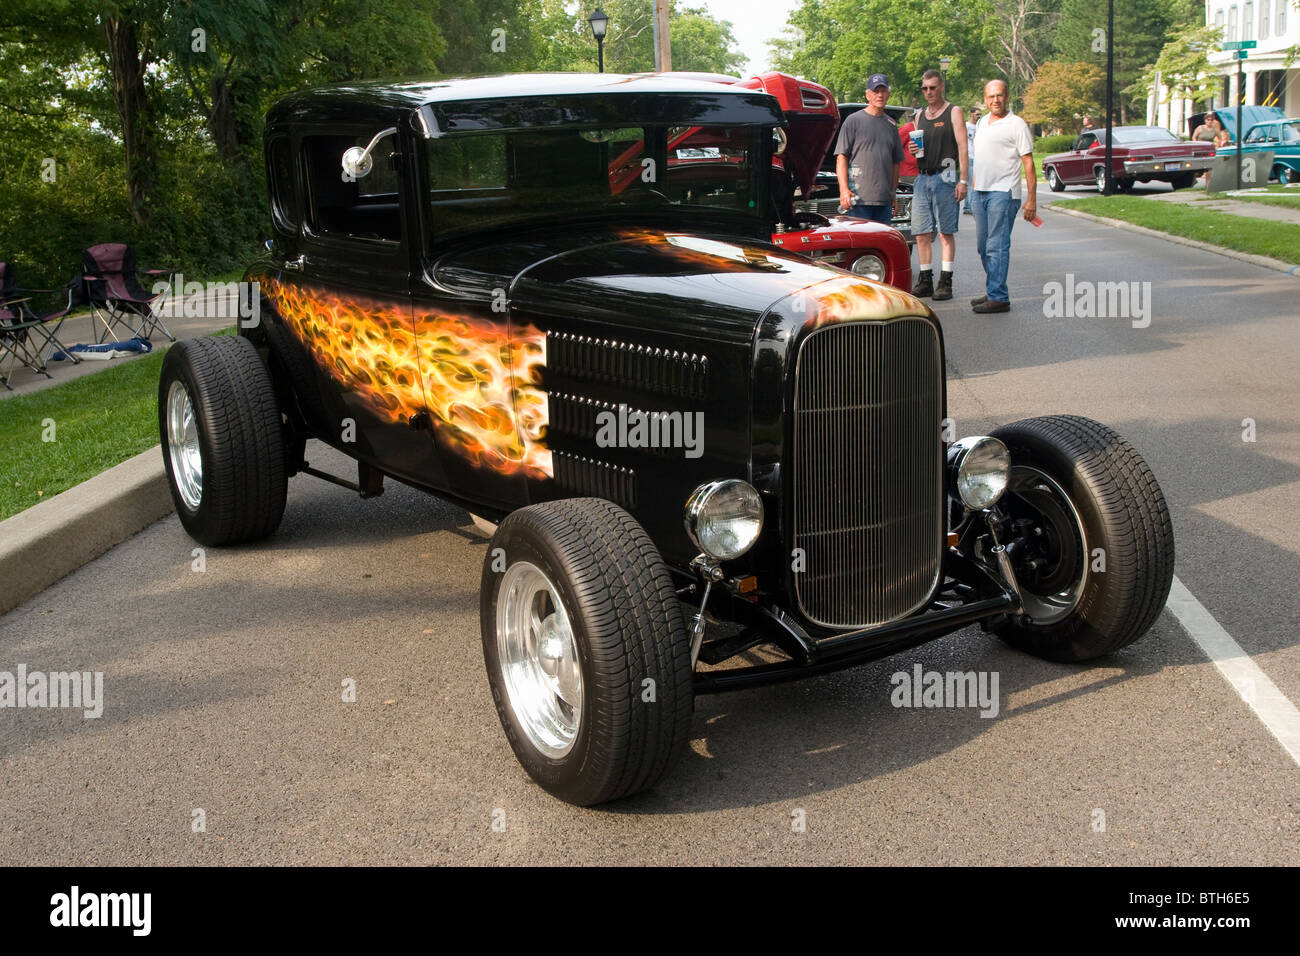 Auto- 1930 Ford Coupe with flames. Car show in Franklin, Ohio, USA. Stock Photo